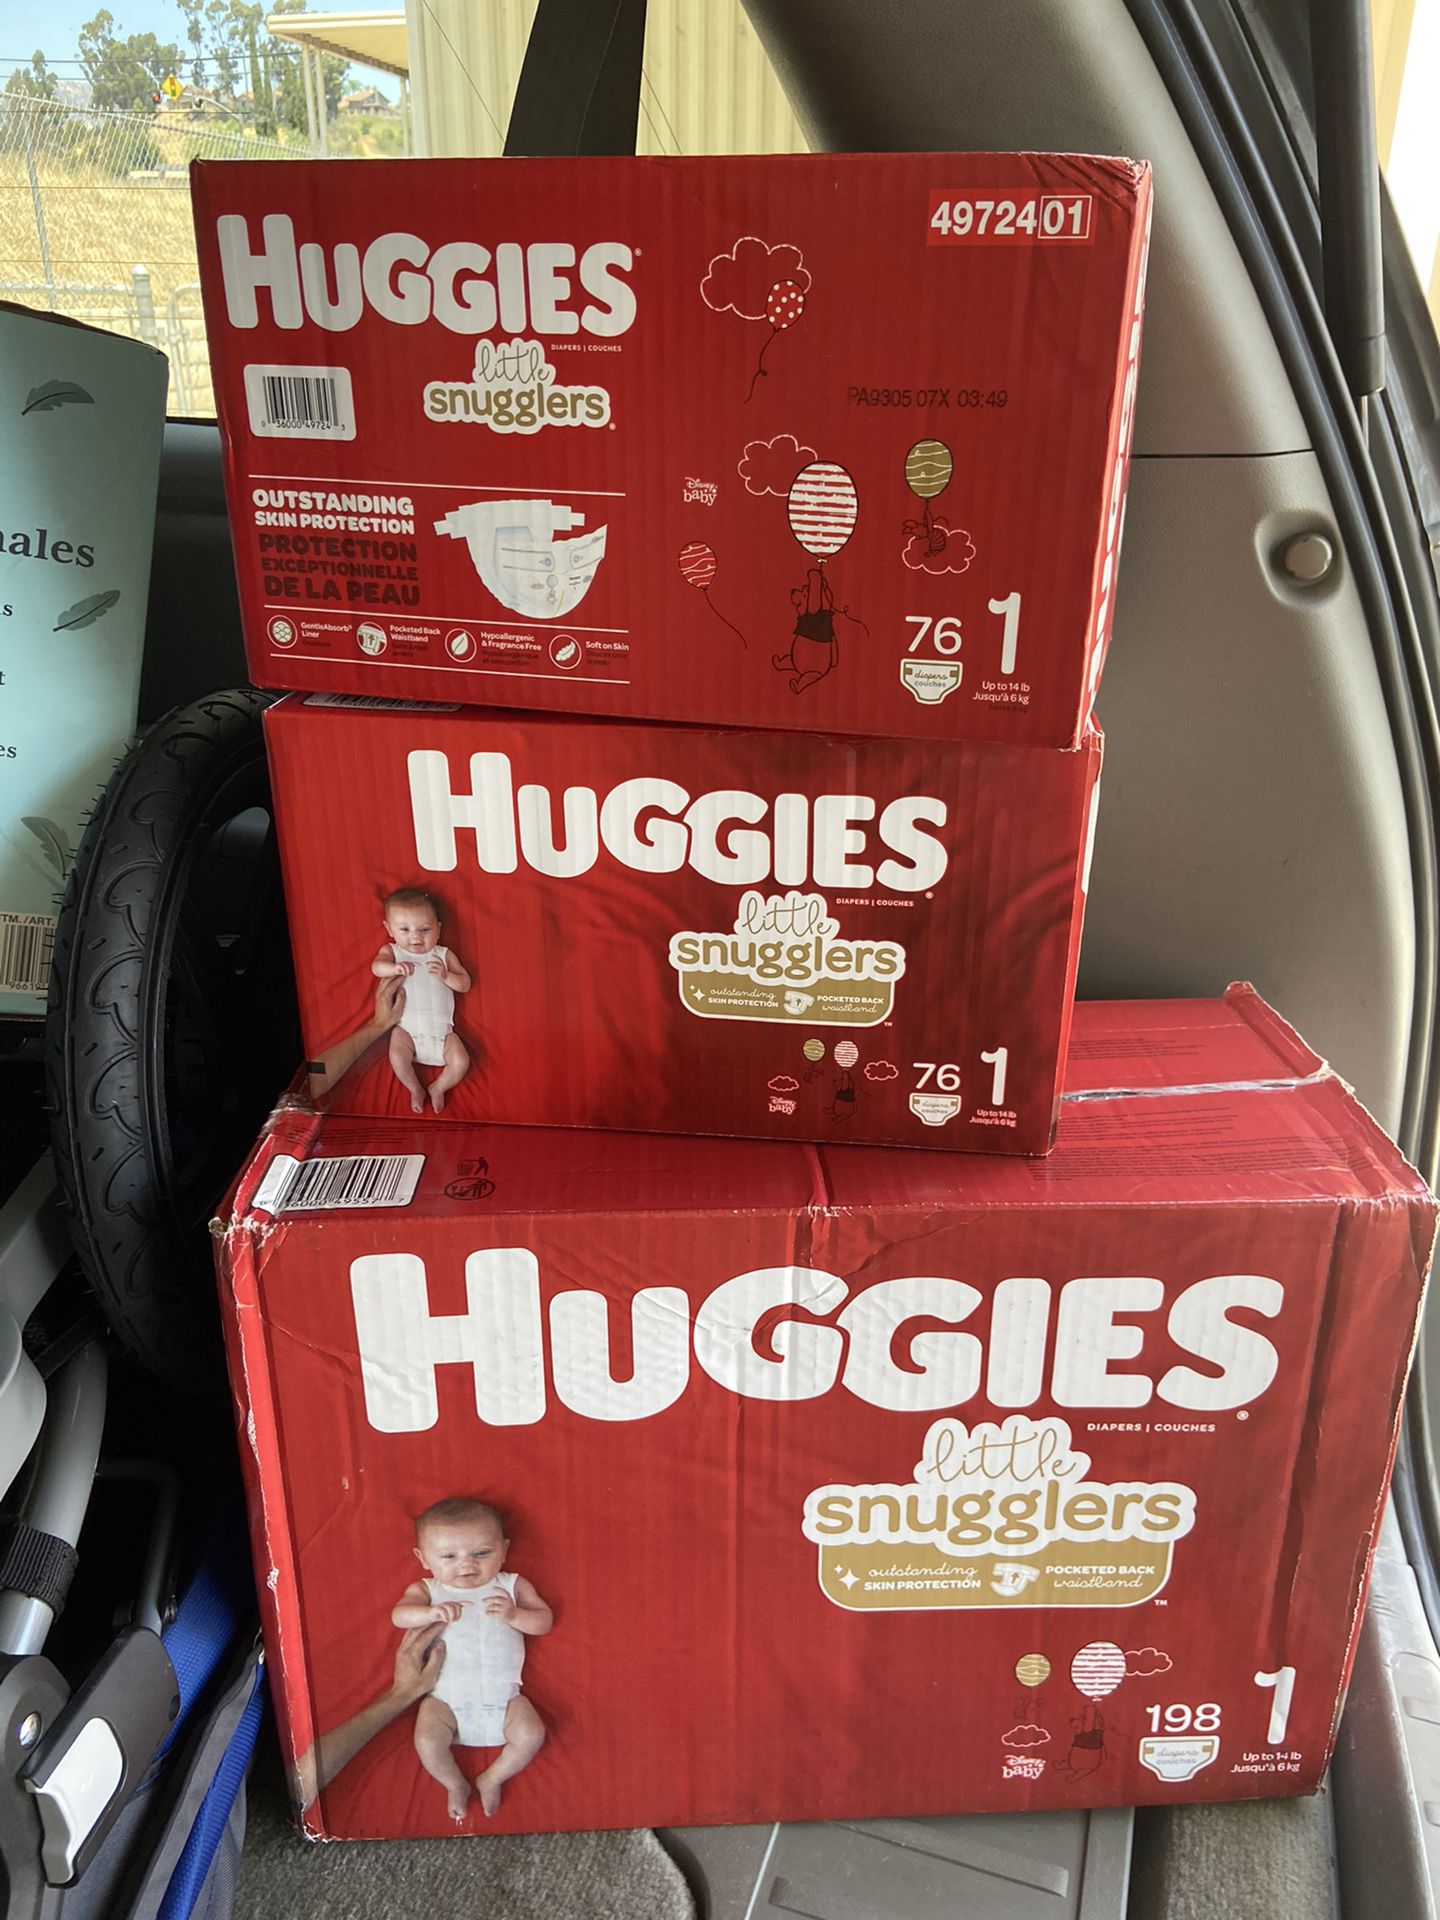 Huggies Diapers brand new size 1 for sale or trade